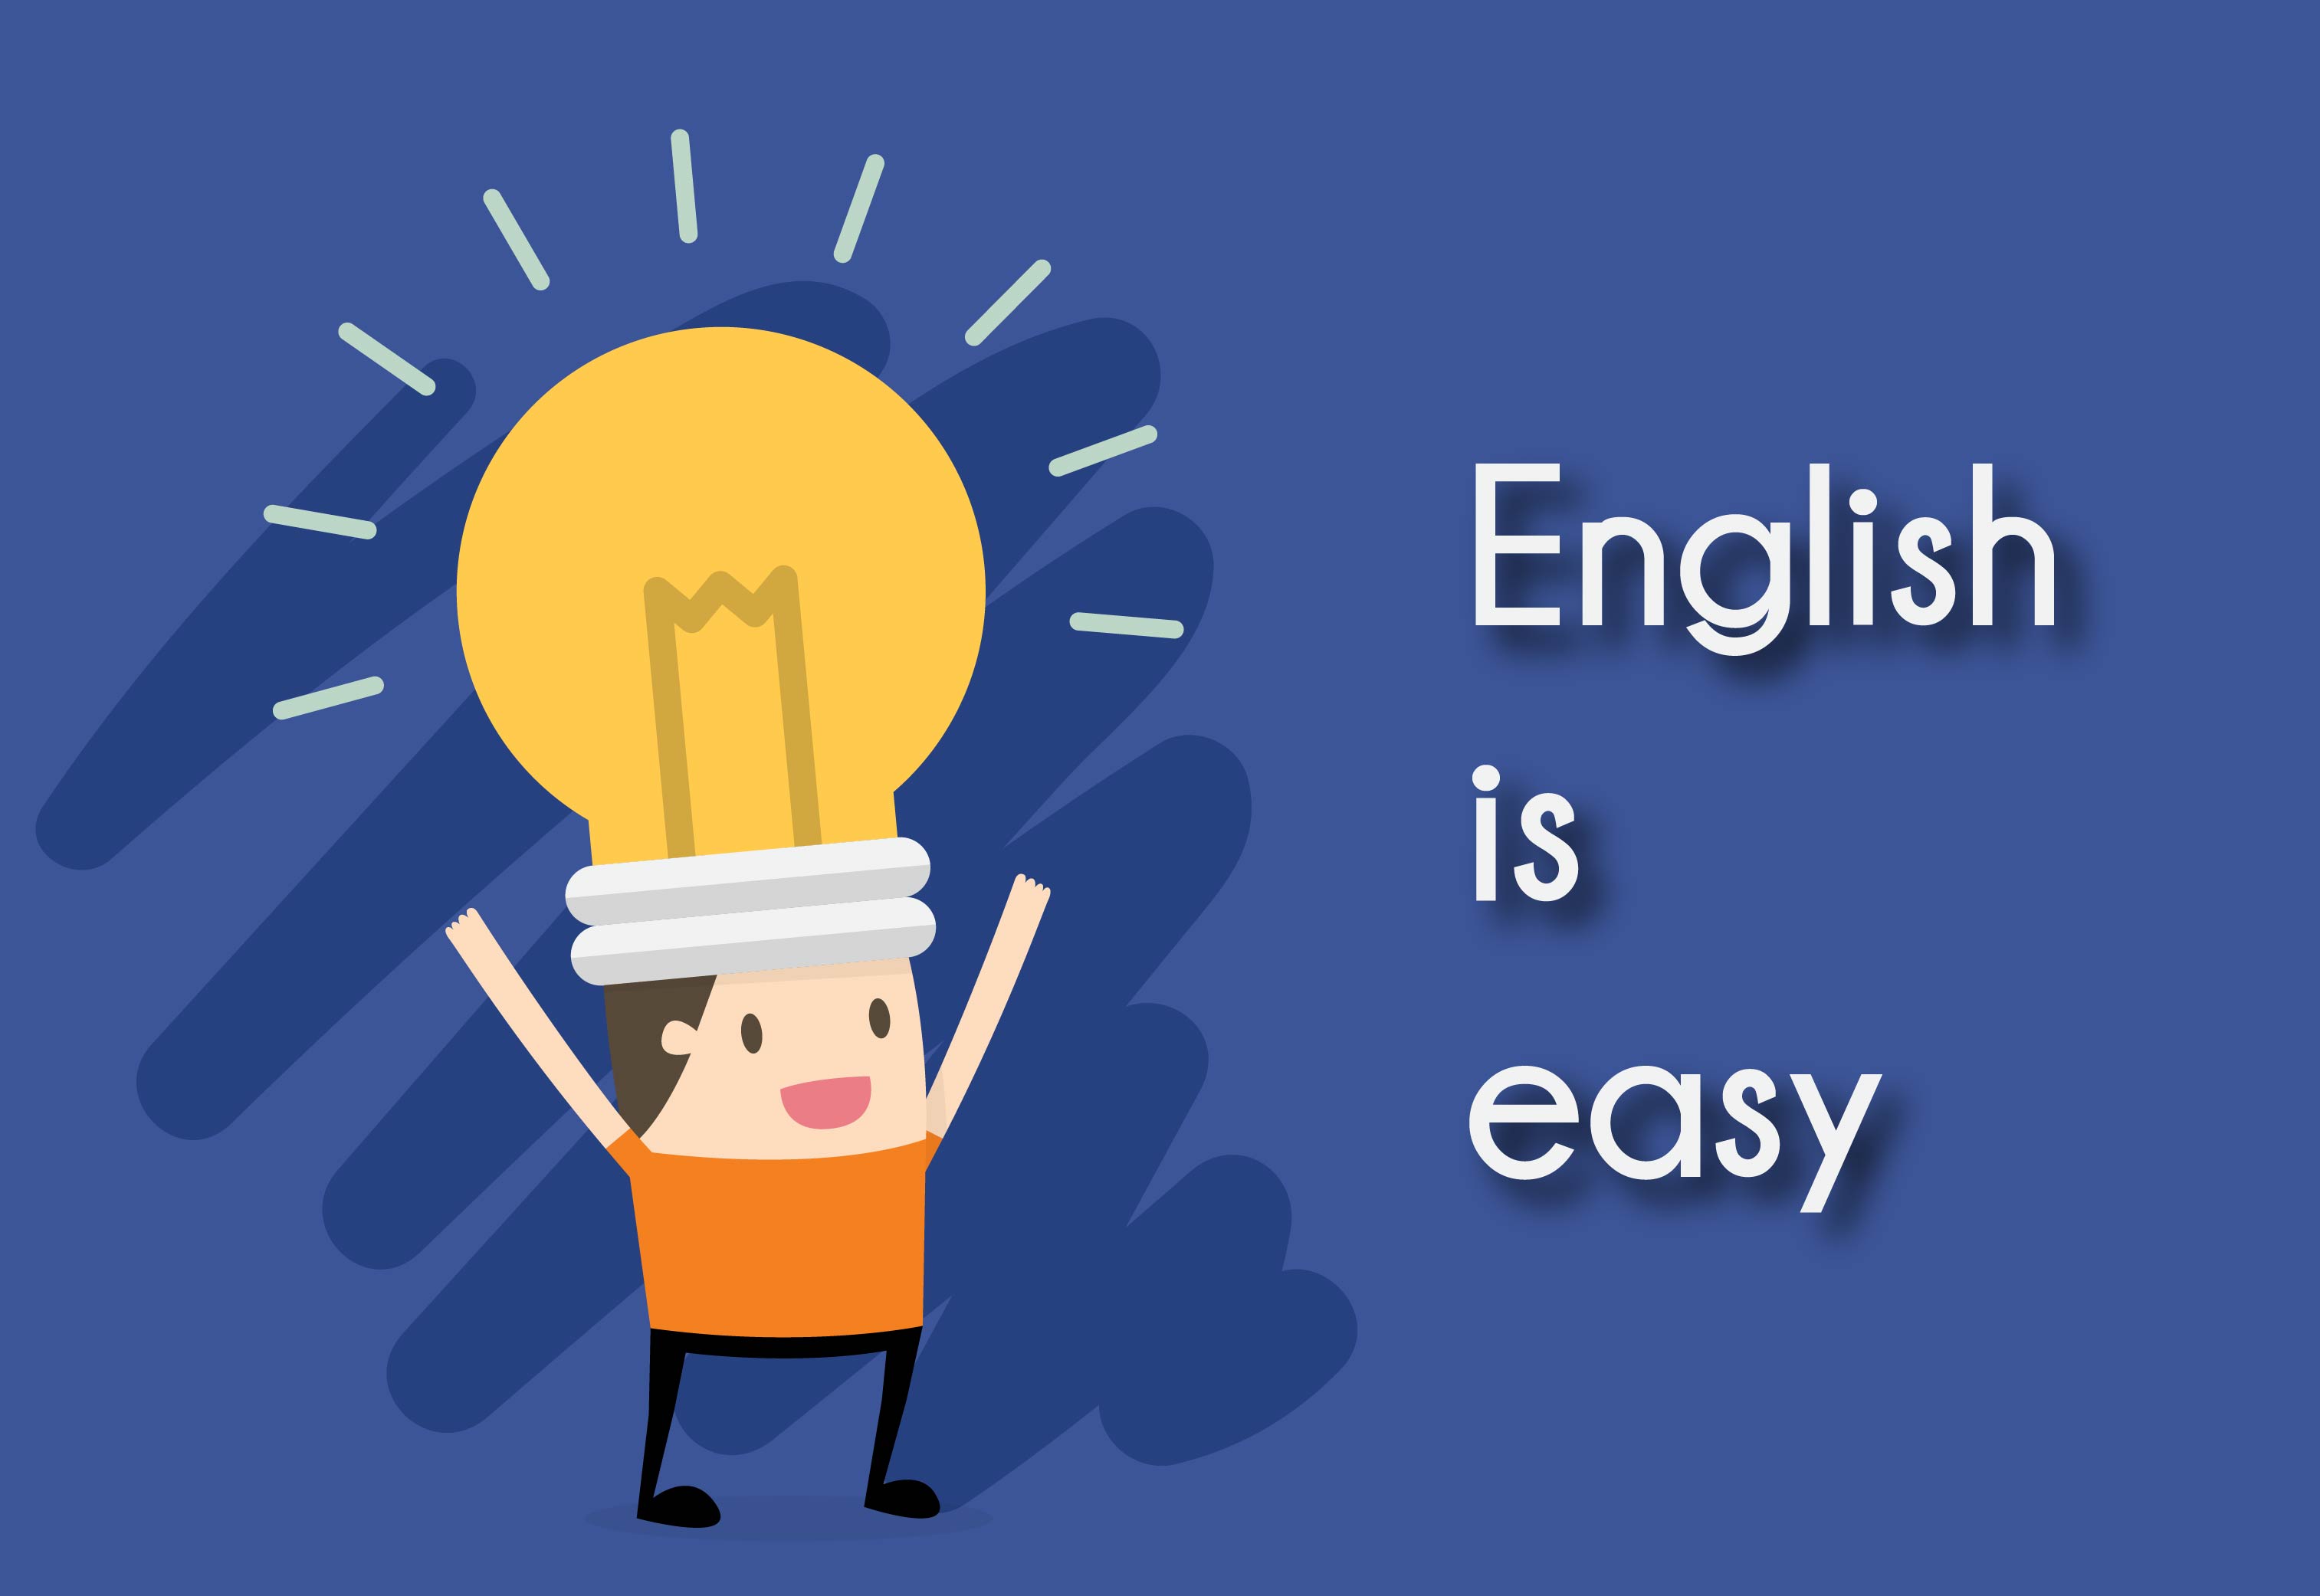 How to Practice English?